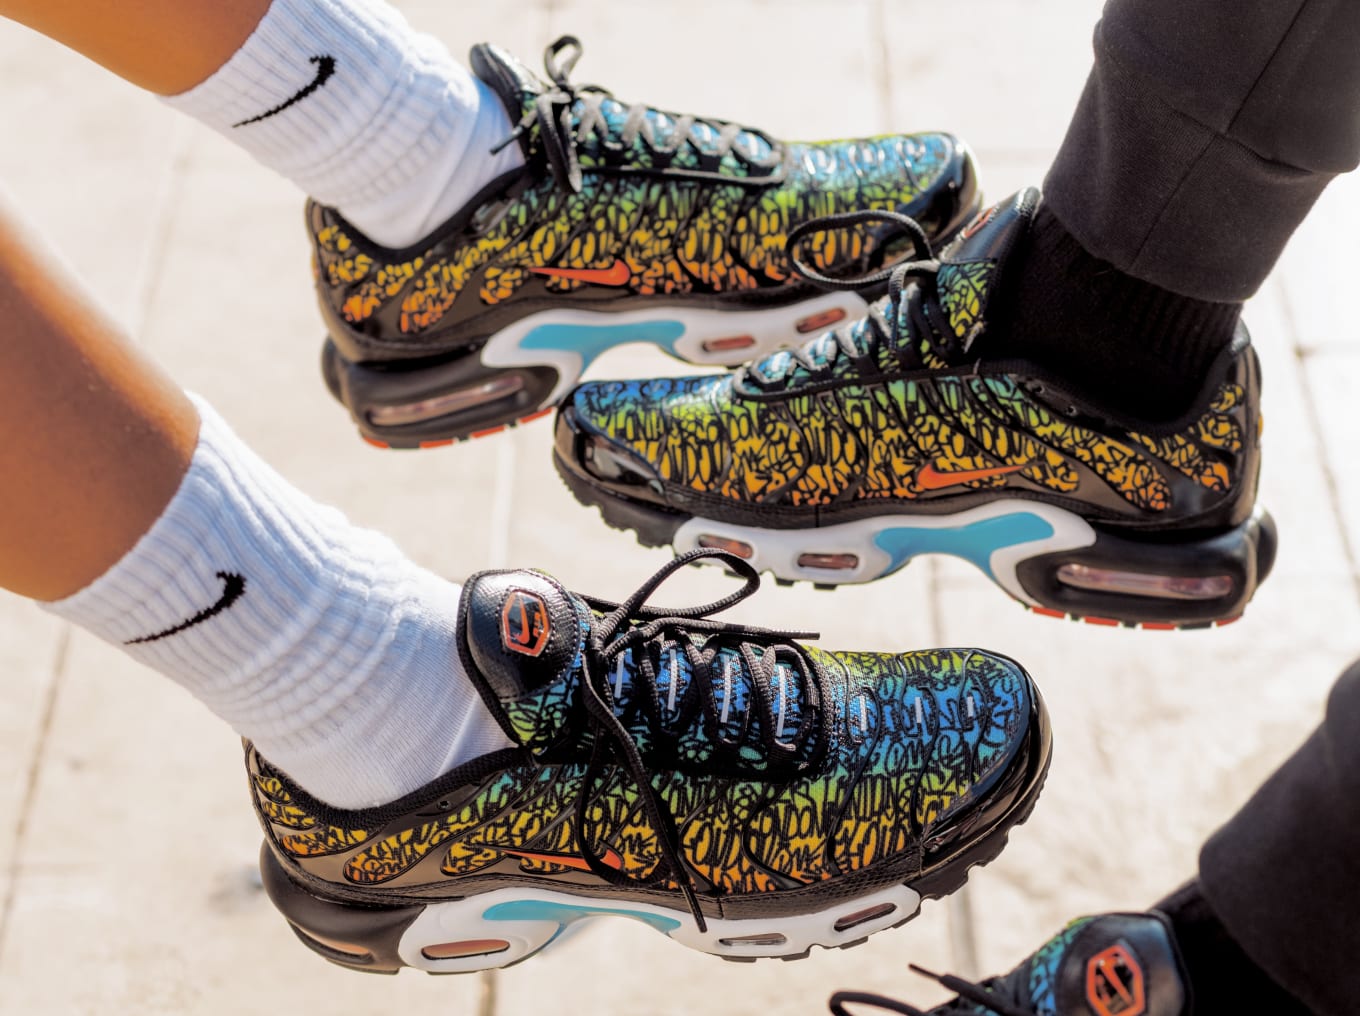 Attendant Aptitude title Nike Air Max Plus (TN) 'Brixton' Release Date July 2022 | Sole Collector